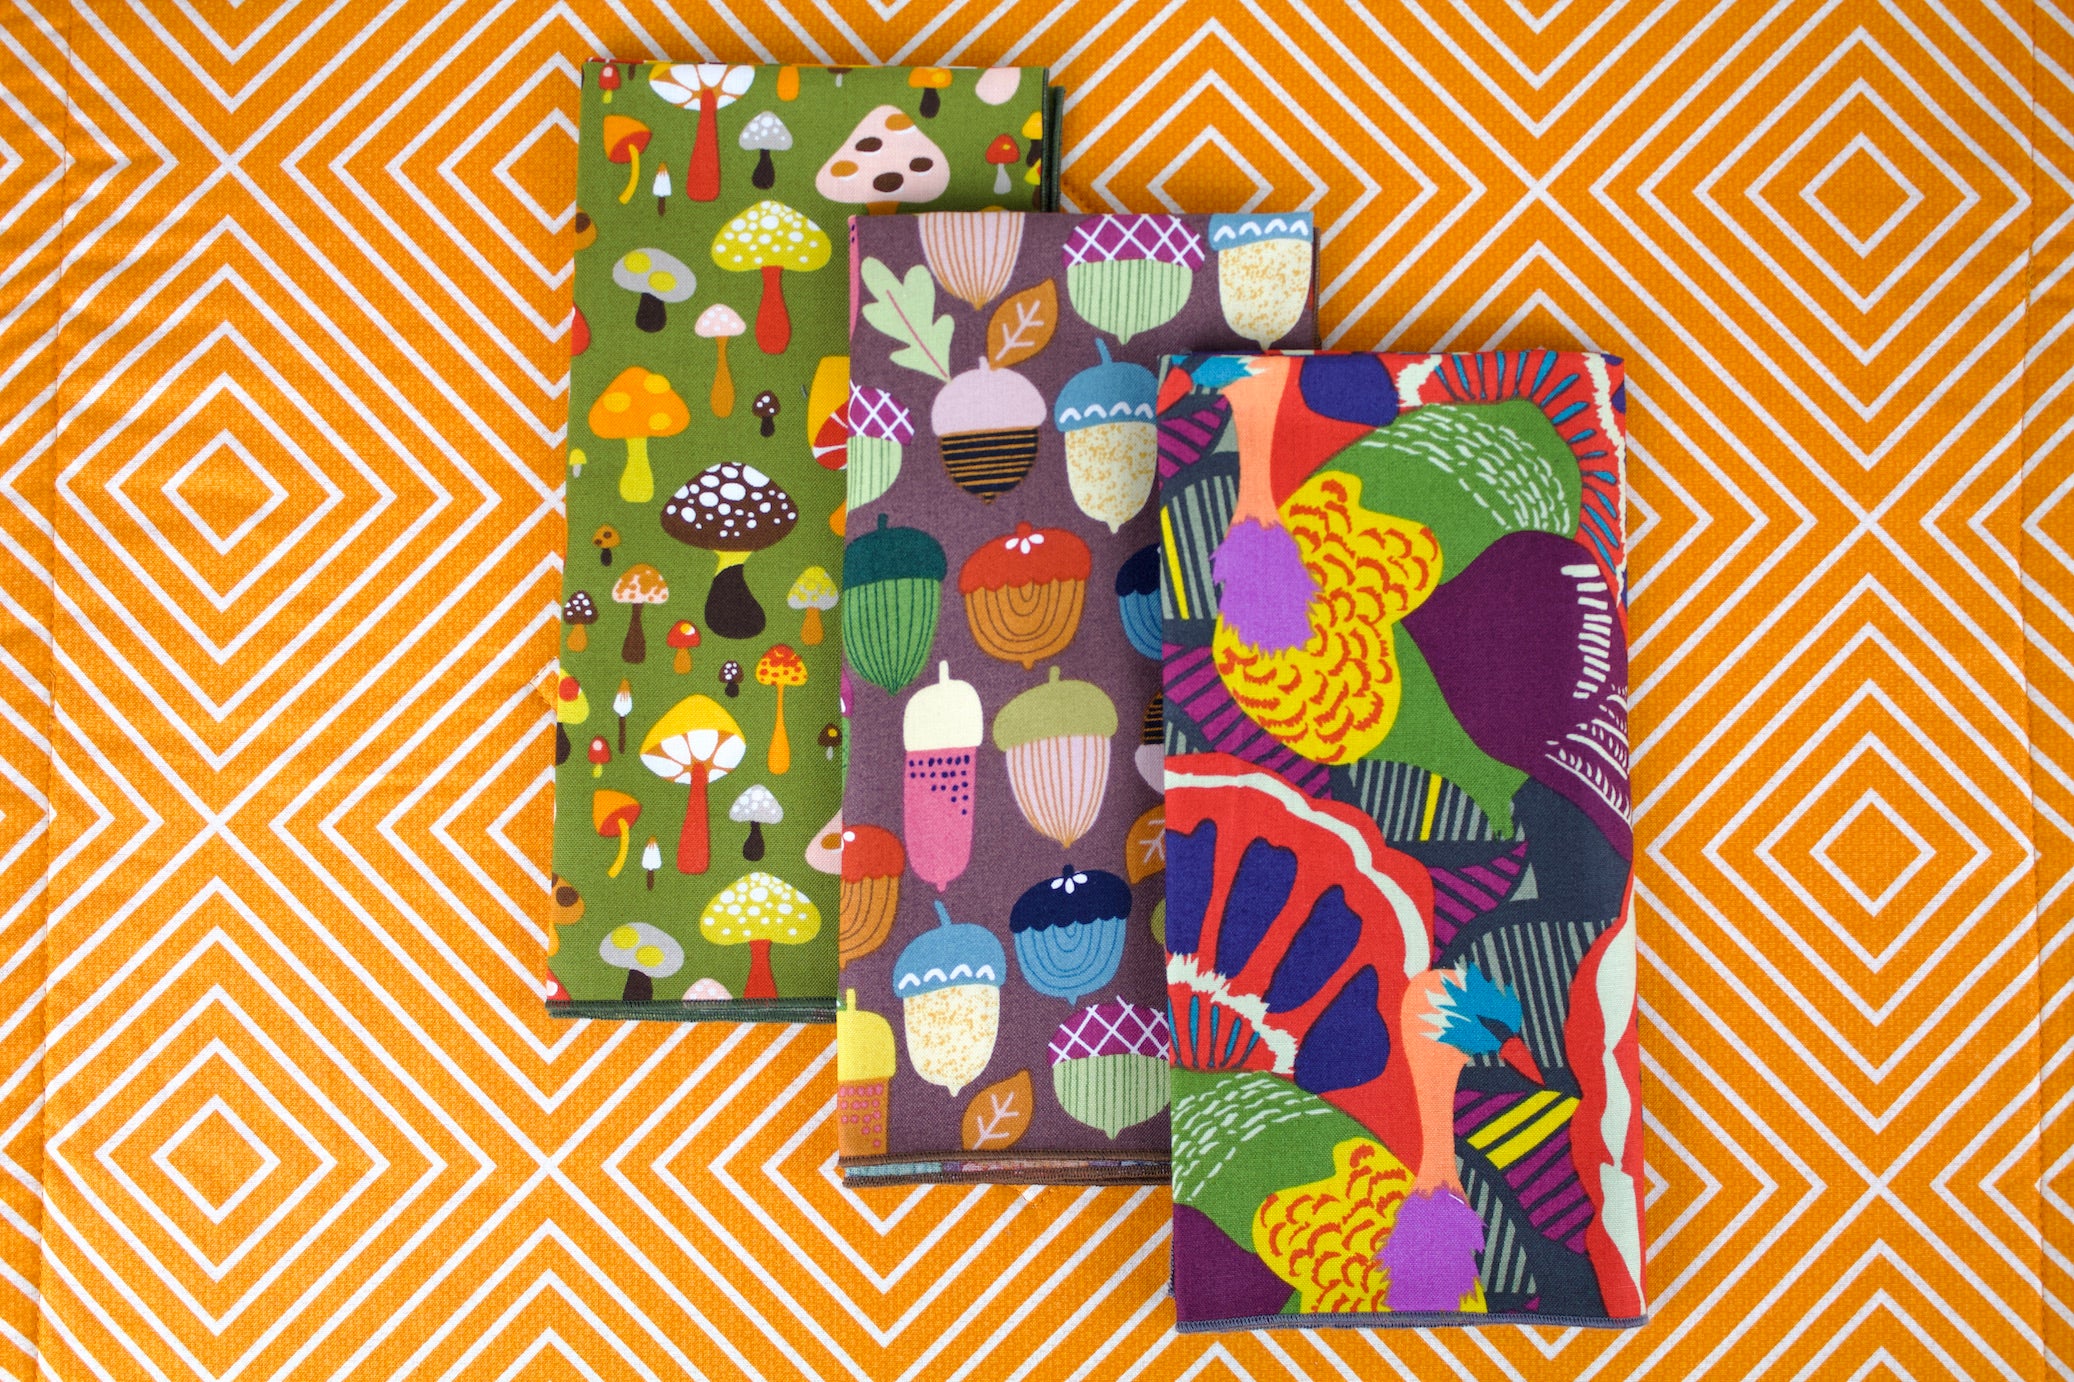 Turkey Parade Napkins - (Set of 4)-The Blue Peony-Animal_Turkey,Category_Napkins,Category_Table Linens,Color_Brown,Color_Gold,Color_Maroon,Color_Orange,Color_Raspberry,Color_Red,Department_Kitchen,Material_Cotton,Pattern_Graphic,Theme_Animal,Theme_Fall,Theme_Thanksgiving